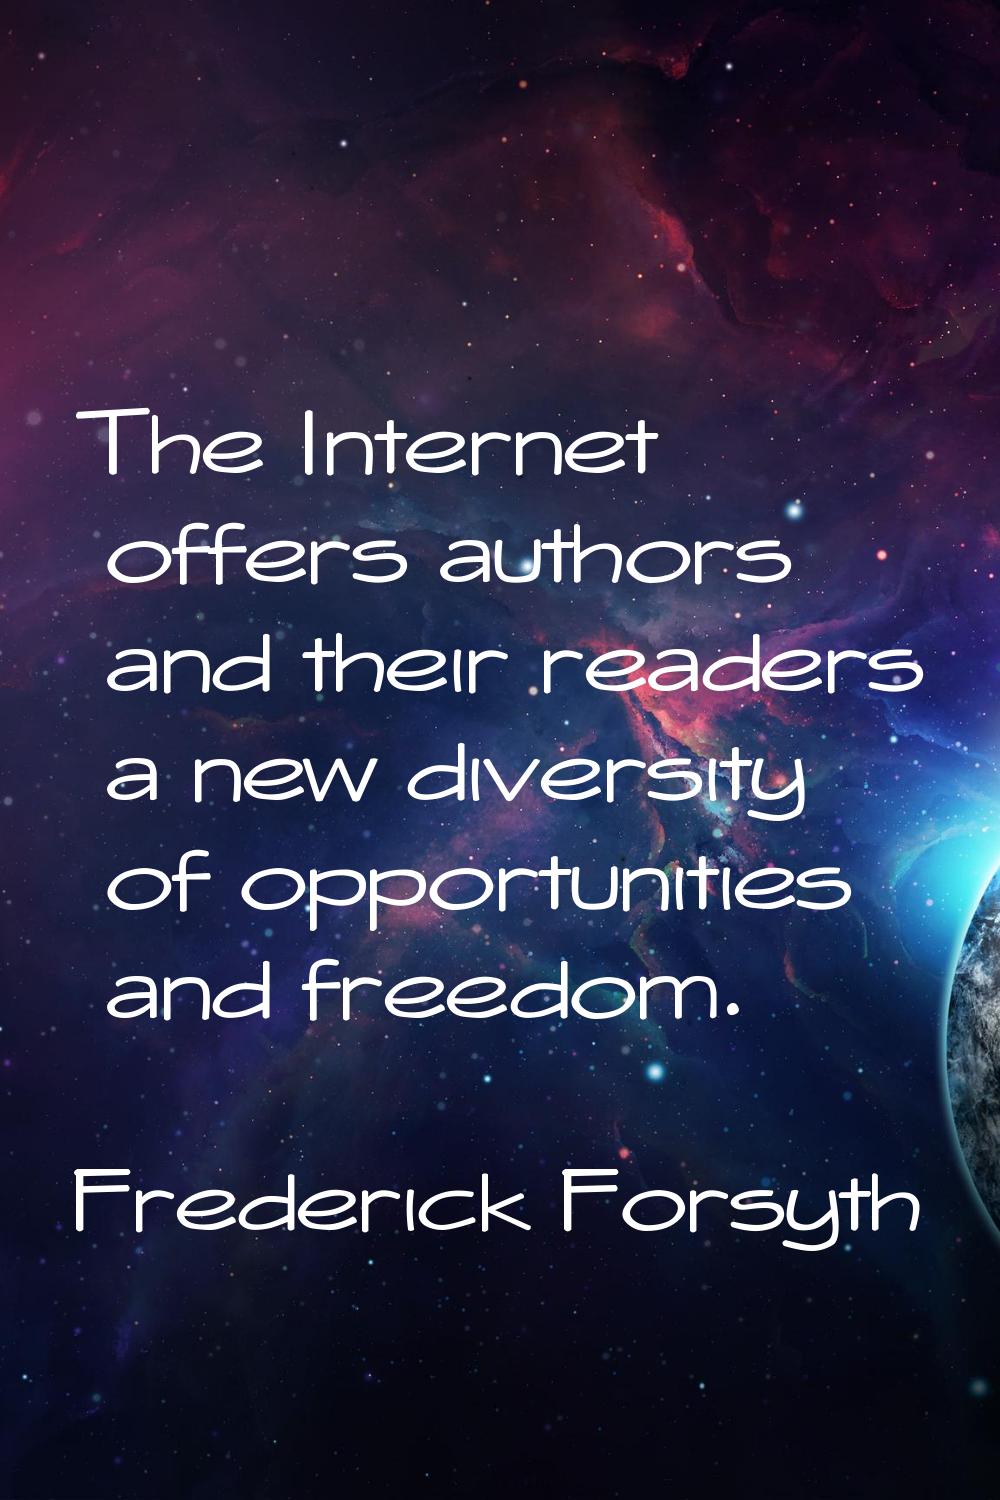 The Internet offers authors and their readers a new diversity of opportunities and freedom.